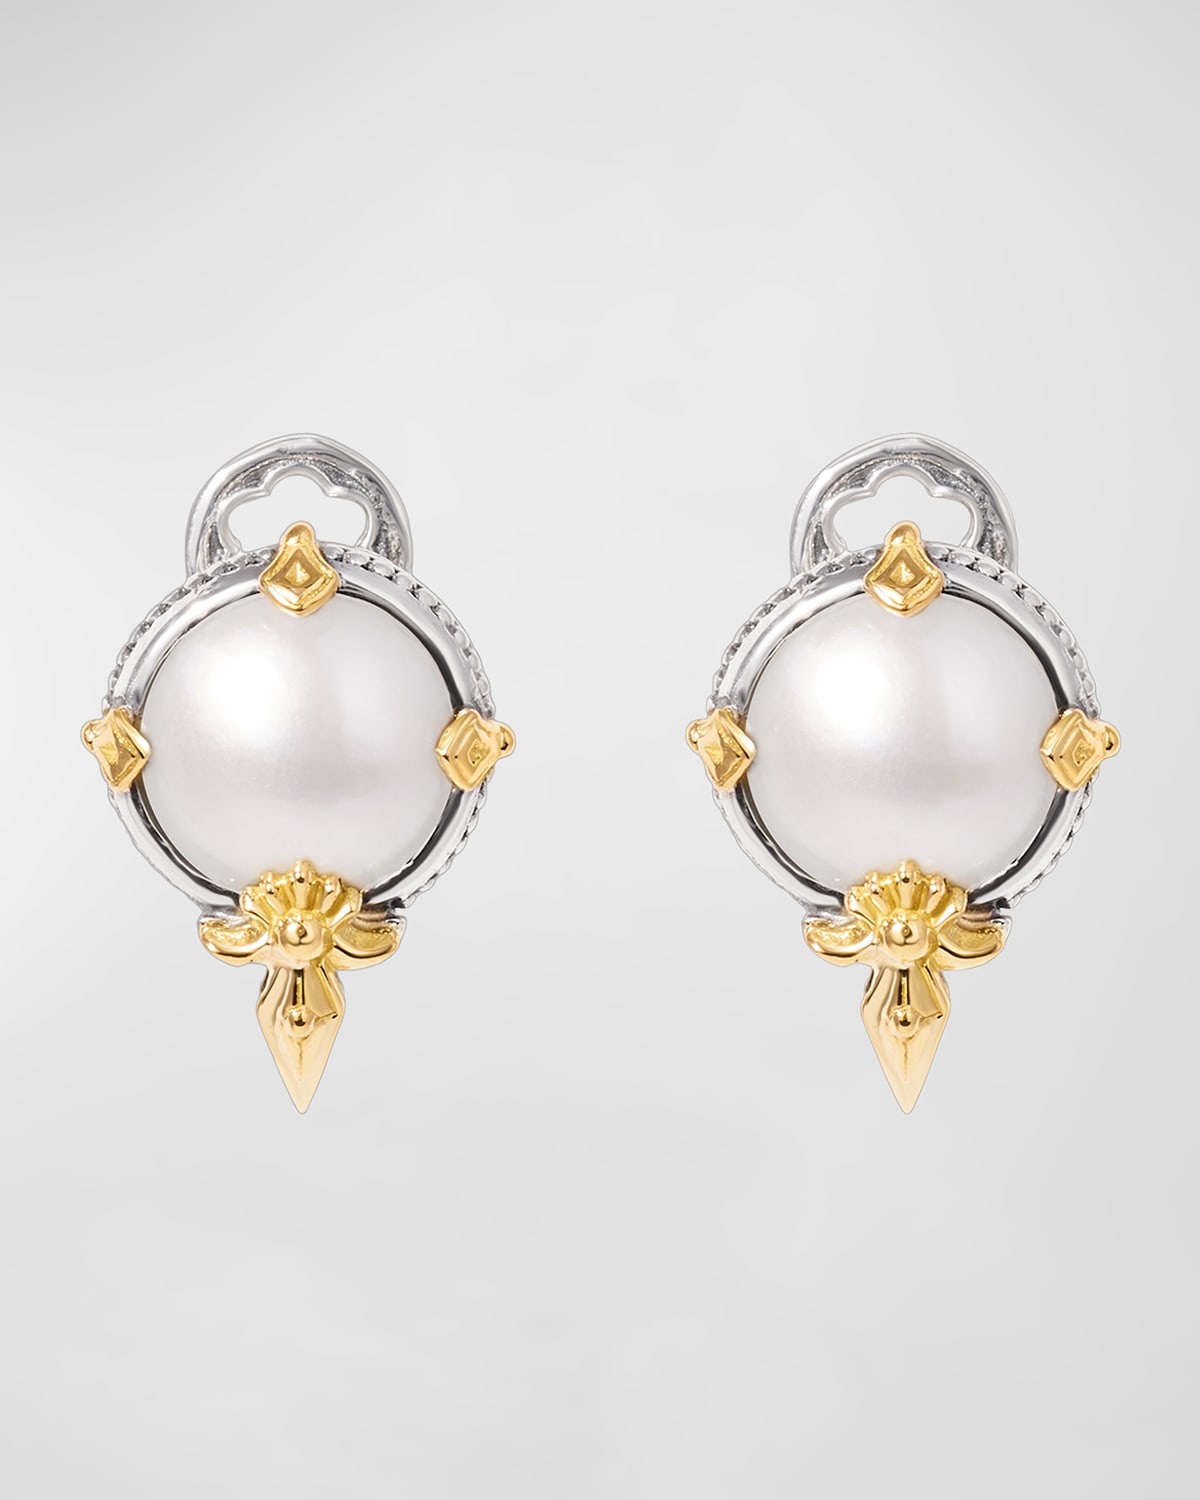 Konstantino Silver And Gold Pearl Stud Earrings In Two Tone